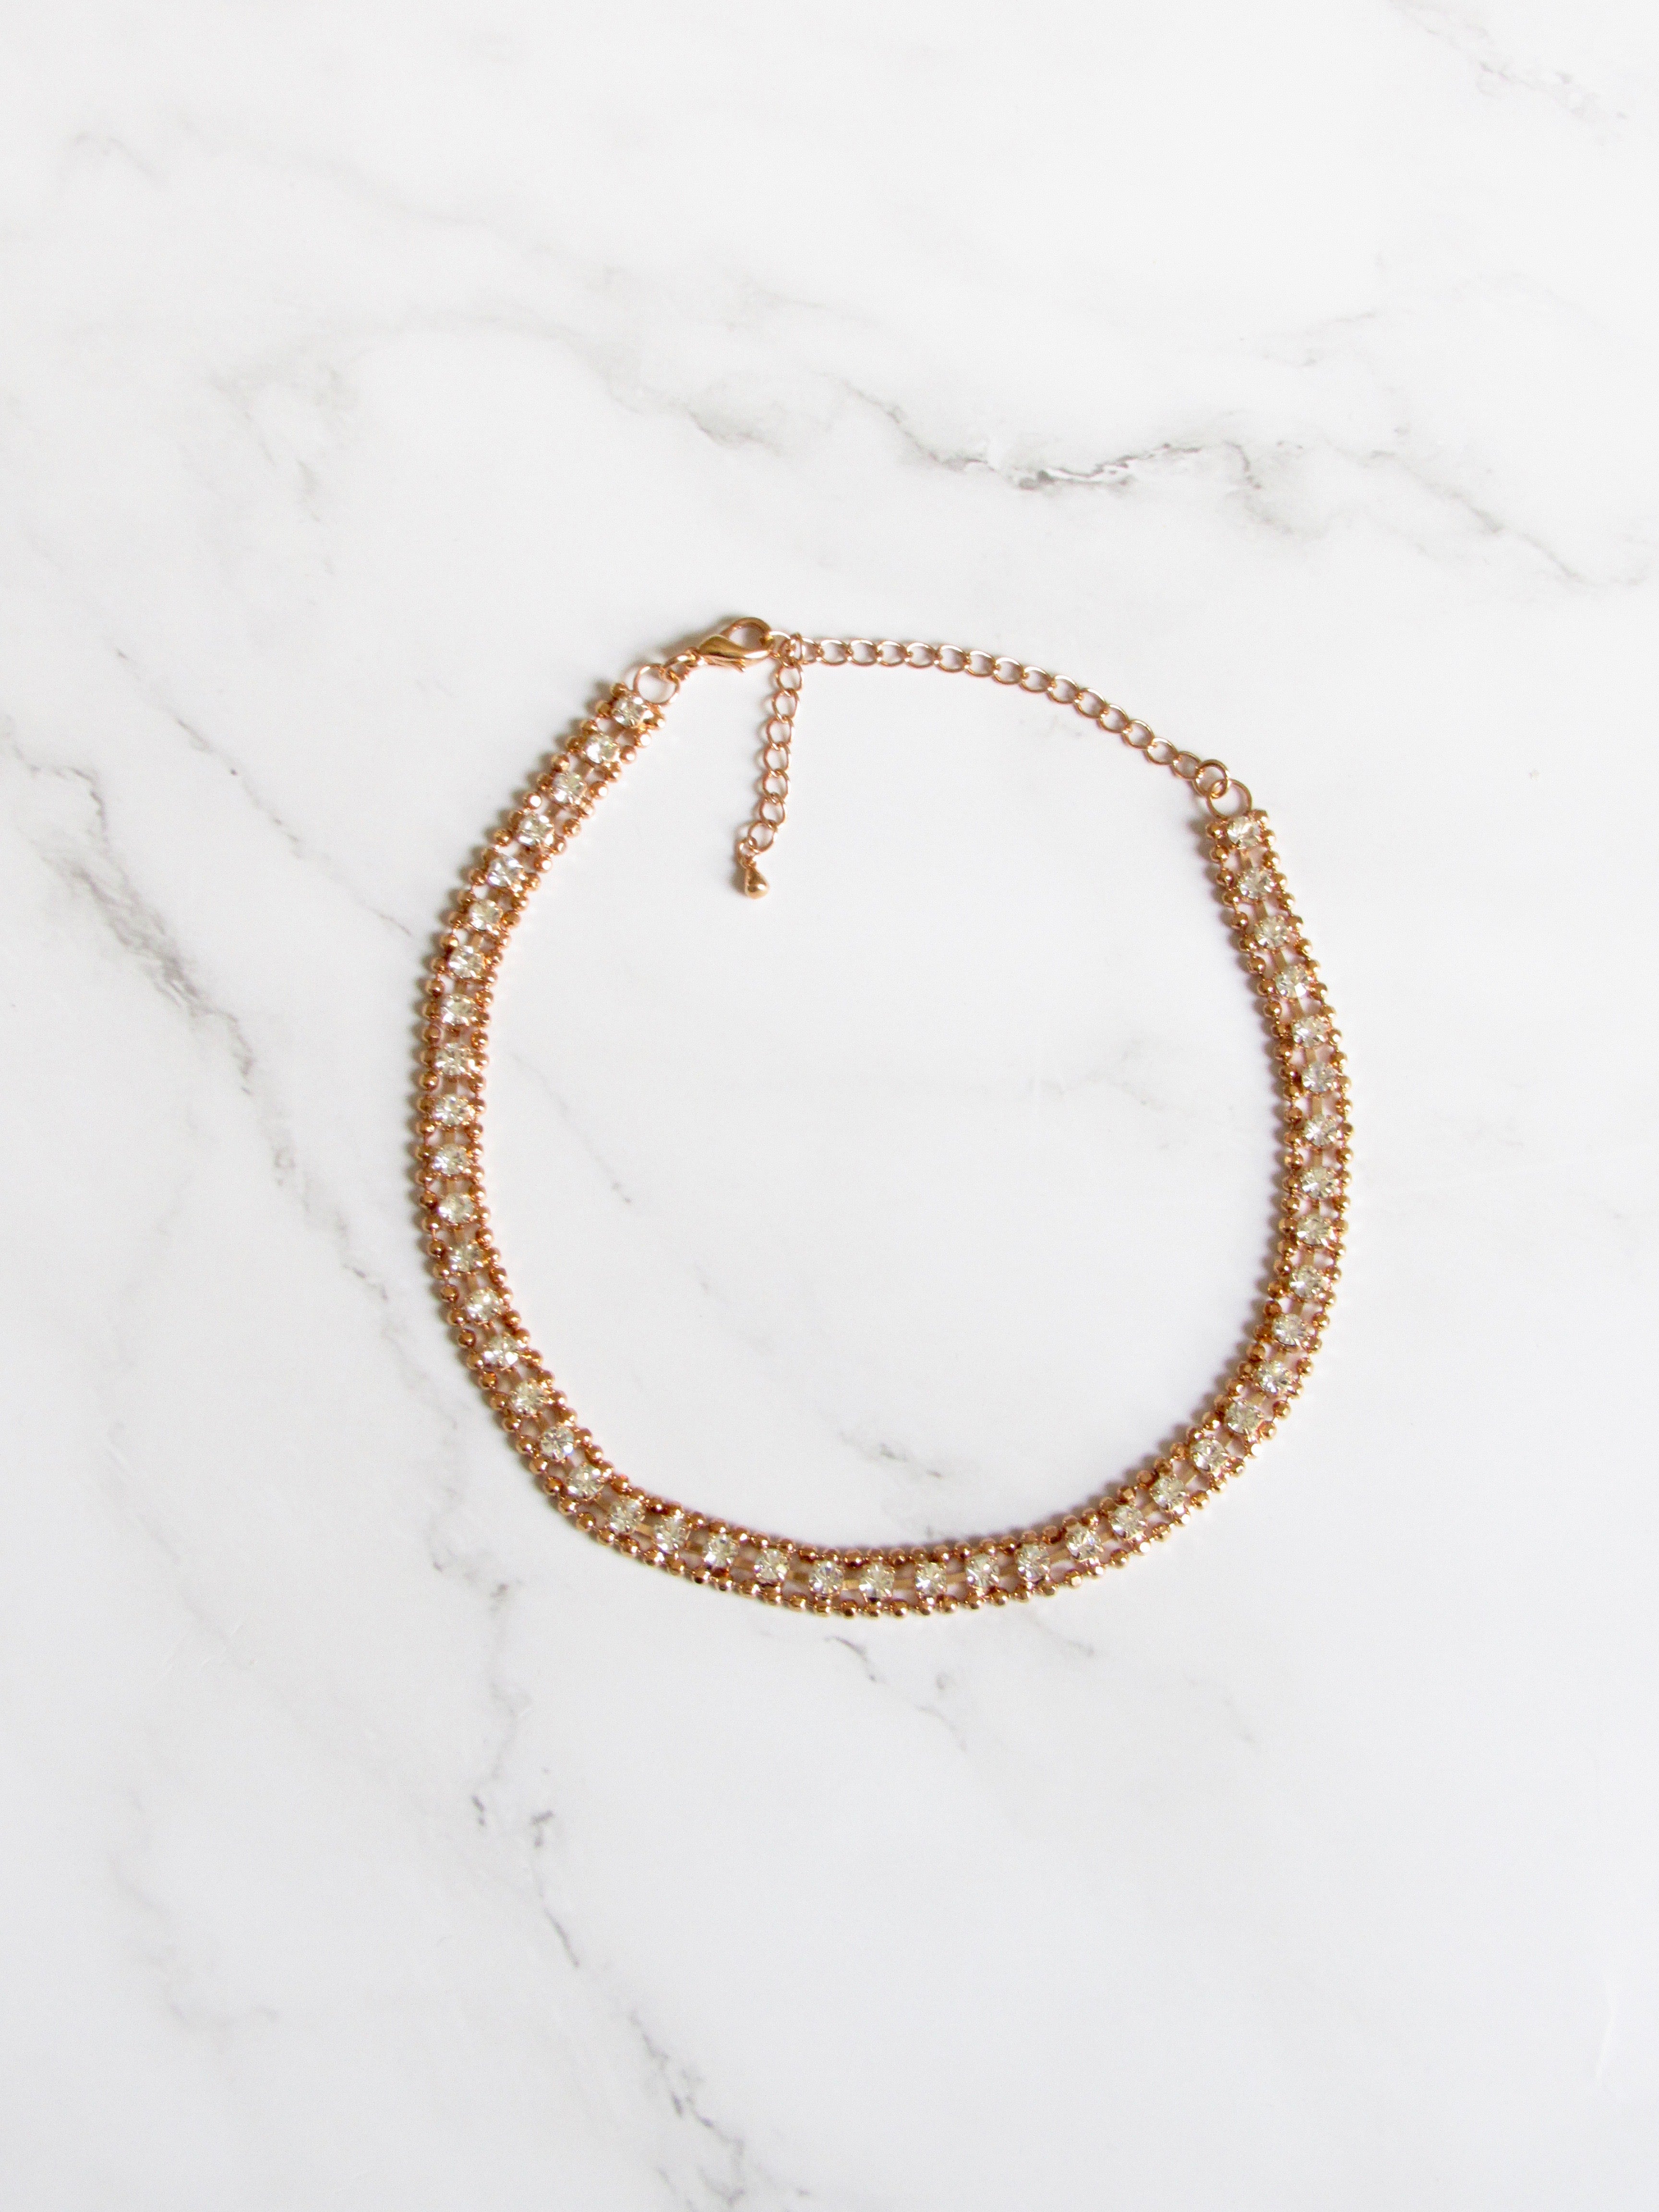 Sparkled Crystal Rose Gold Lace Collar Necklace